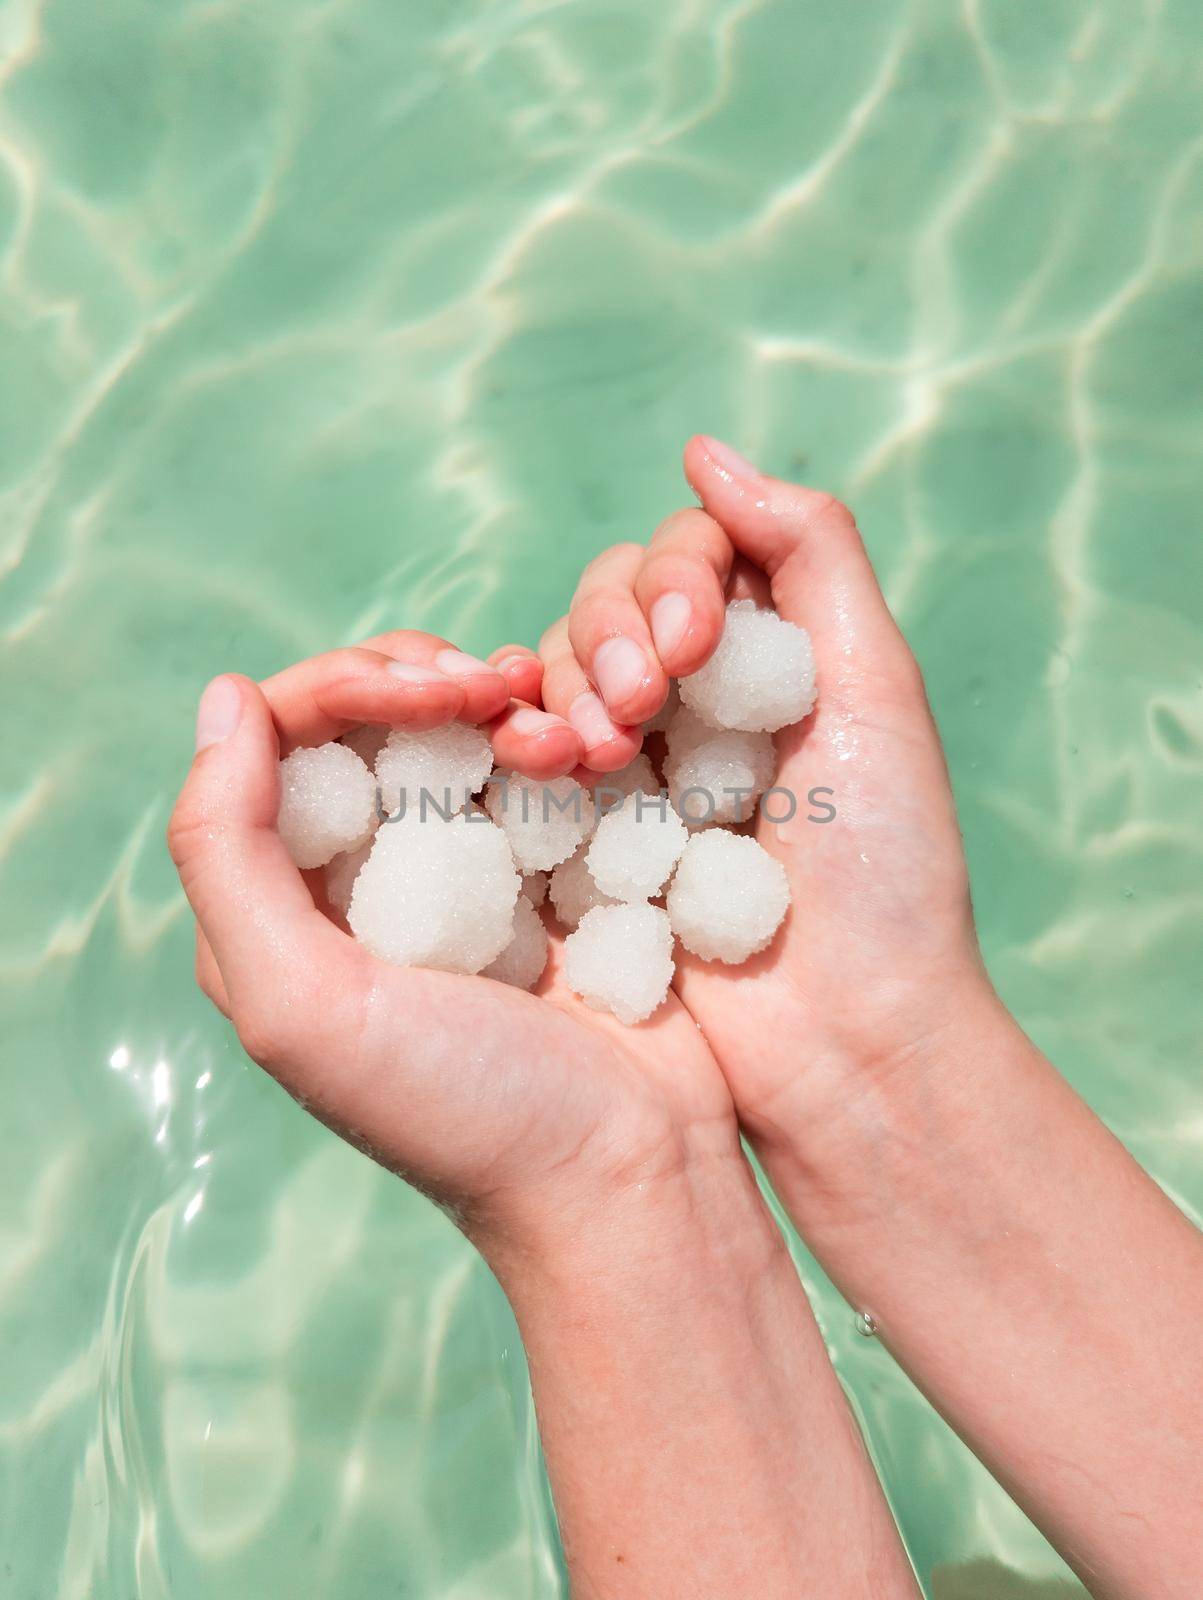 Hands holding sea salt crystals heart-saped on sea water background. Dead sea salt spa minerals cosmetic concept